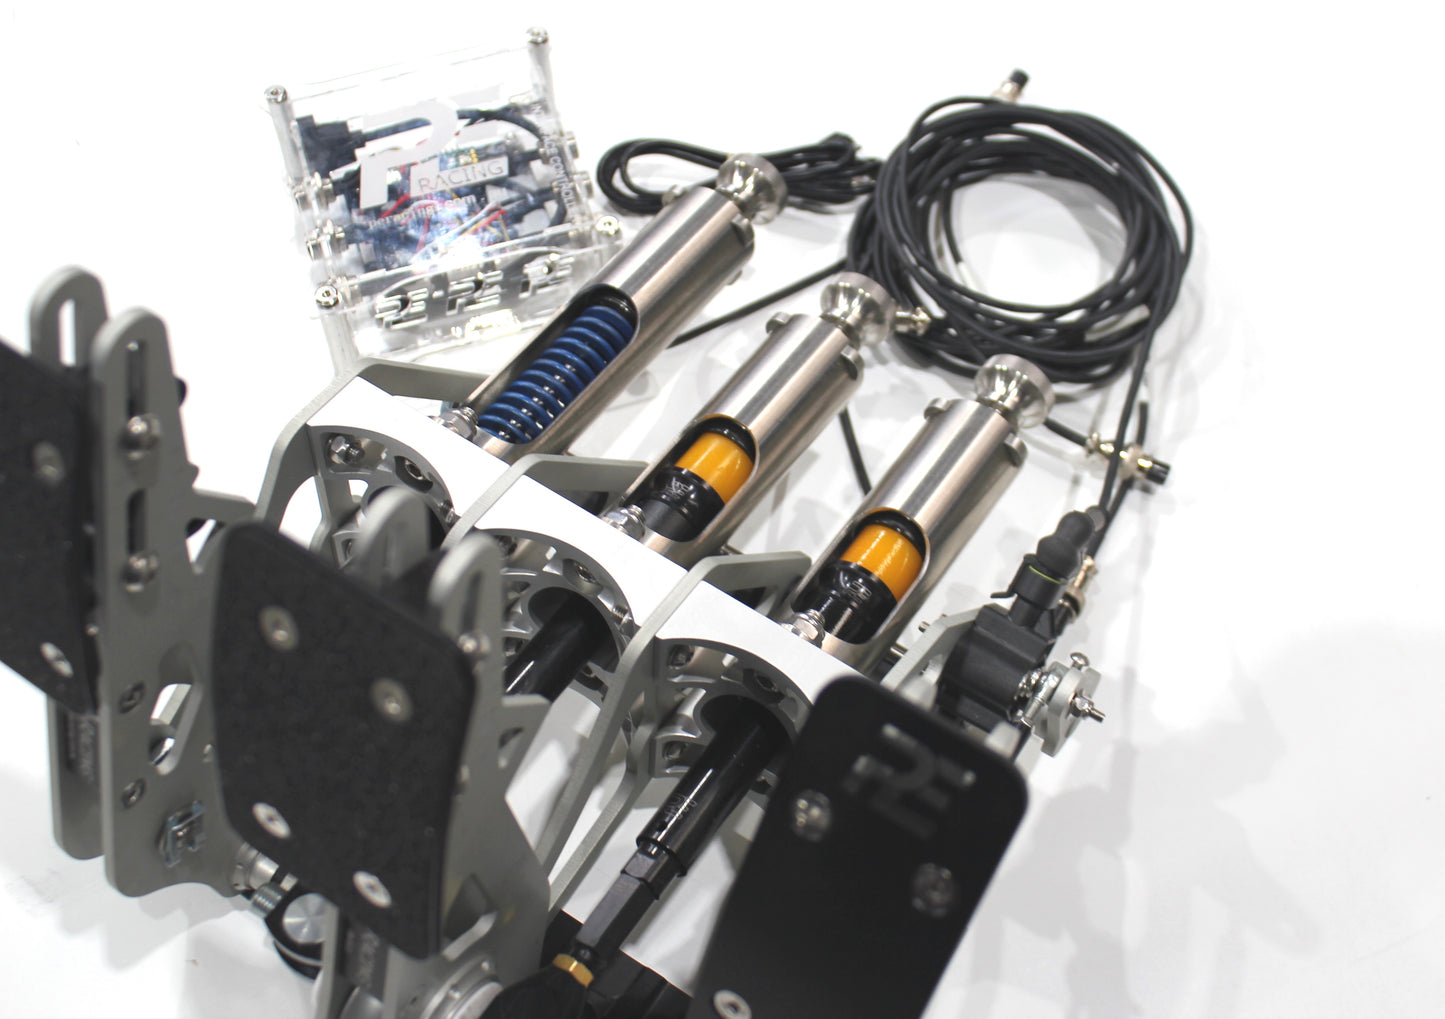 Load Cell Sim Racing Pedals Kit - Professional Driver Training